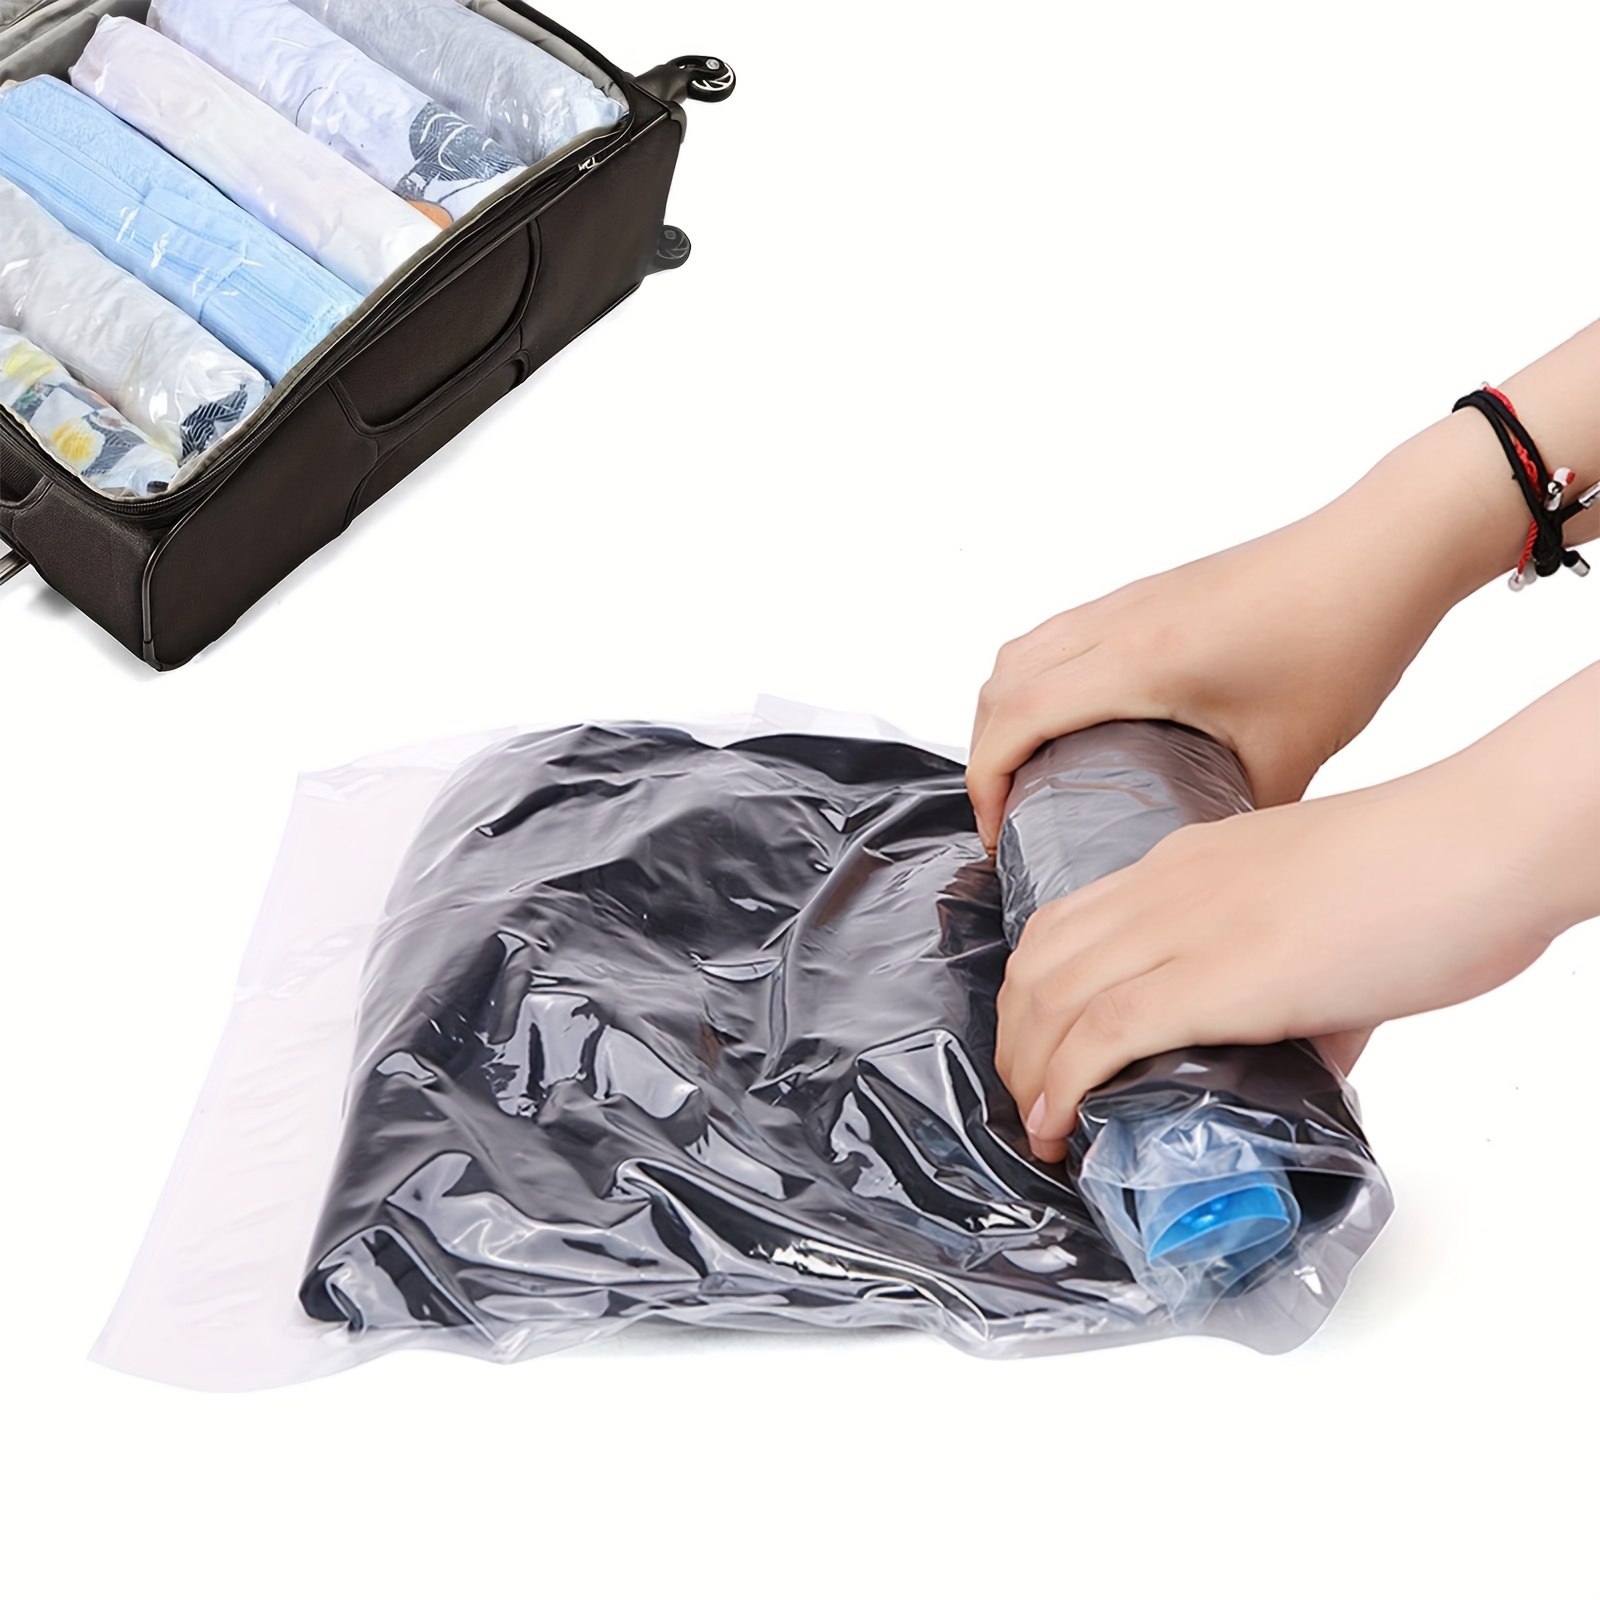 Small 35*50cm Hand-rolled Vacuum Compression Bag, For Travel Space Saver  Bags, Reusable Roll-Up Compression Bag, Clothes Storage, Travel Essentials